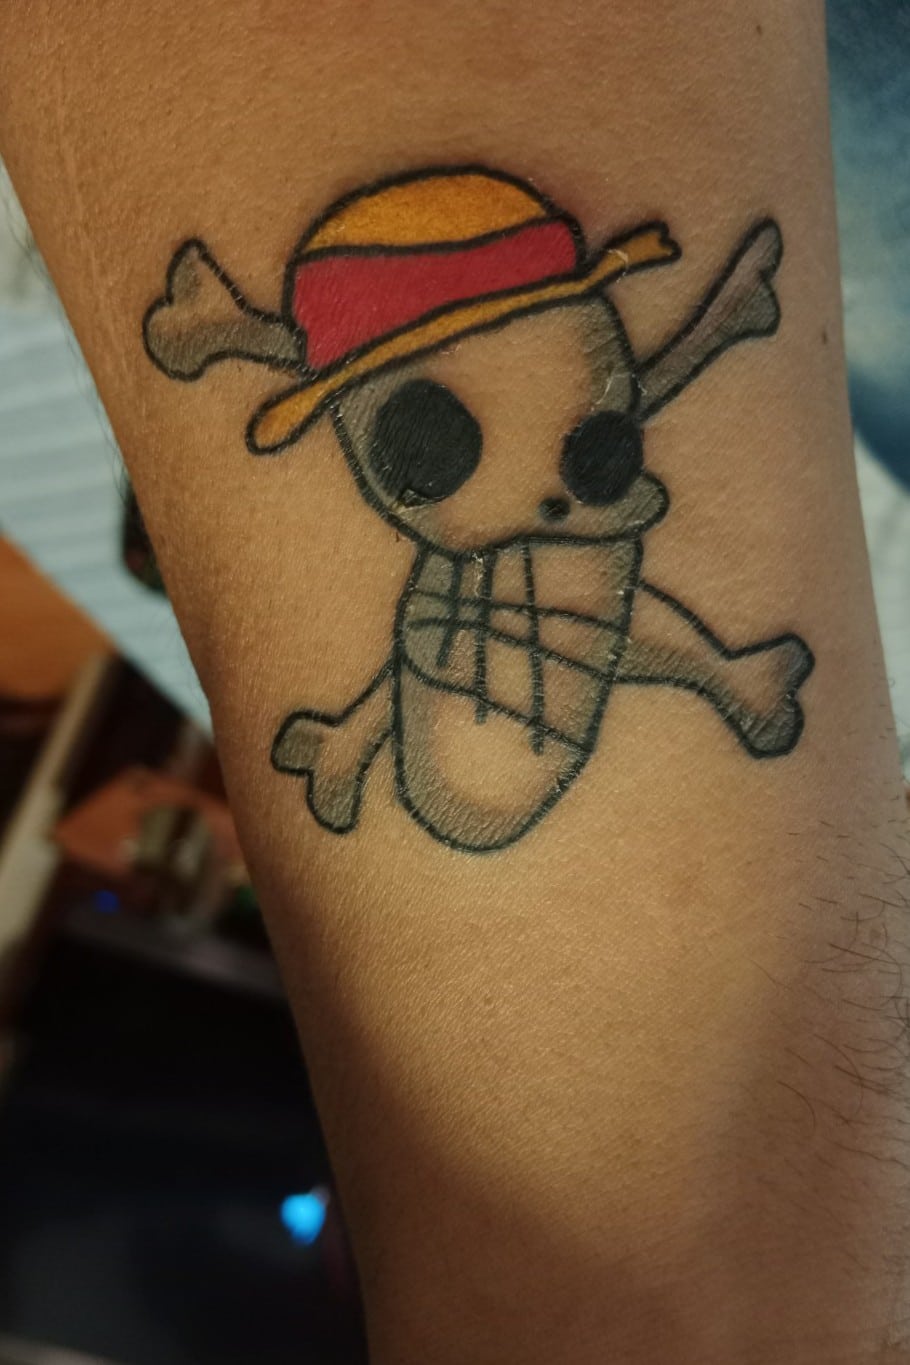 Luffy's First Jolly Rodger tattoo idea